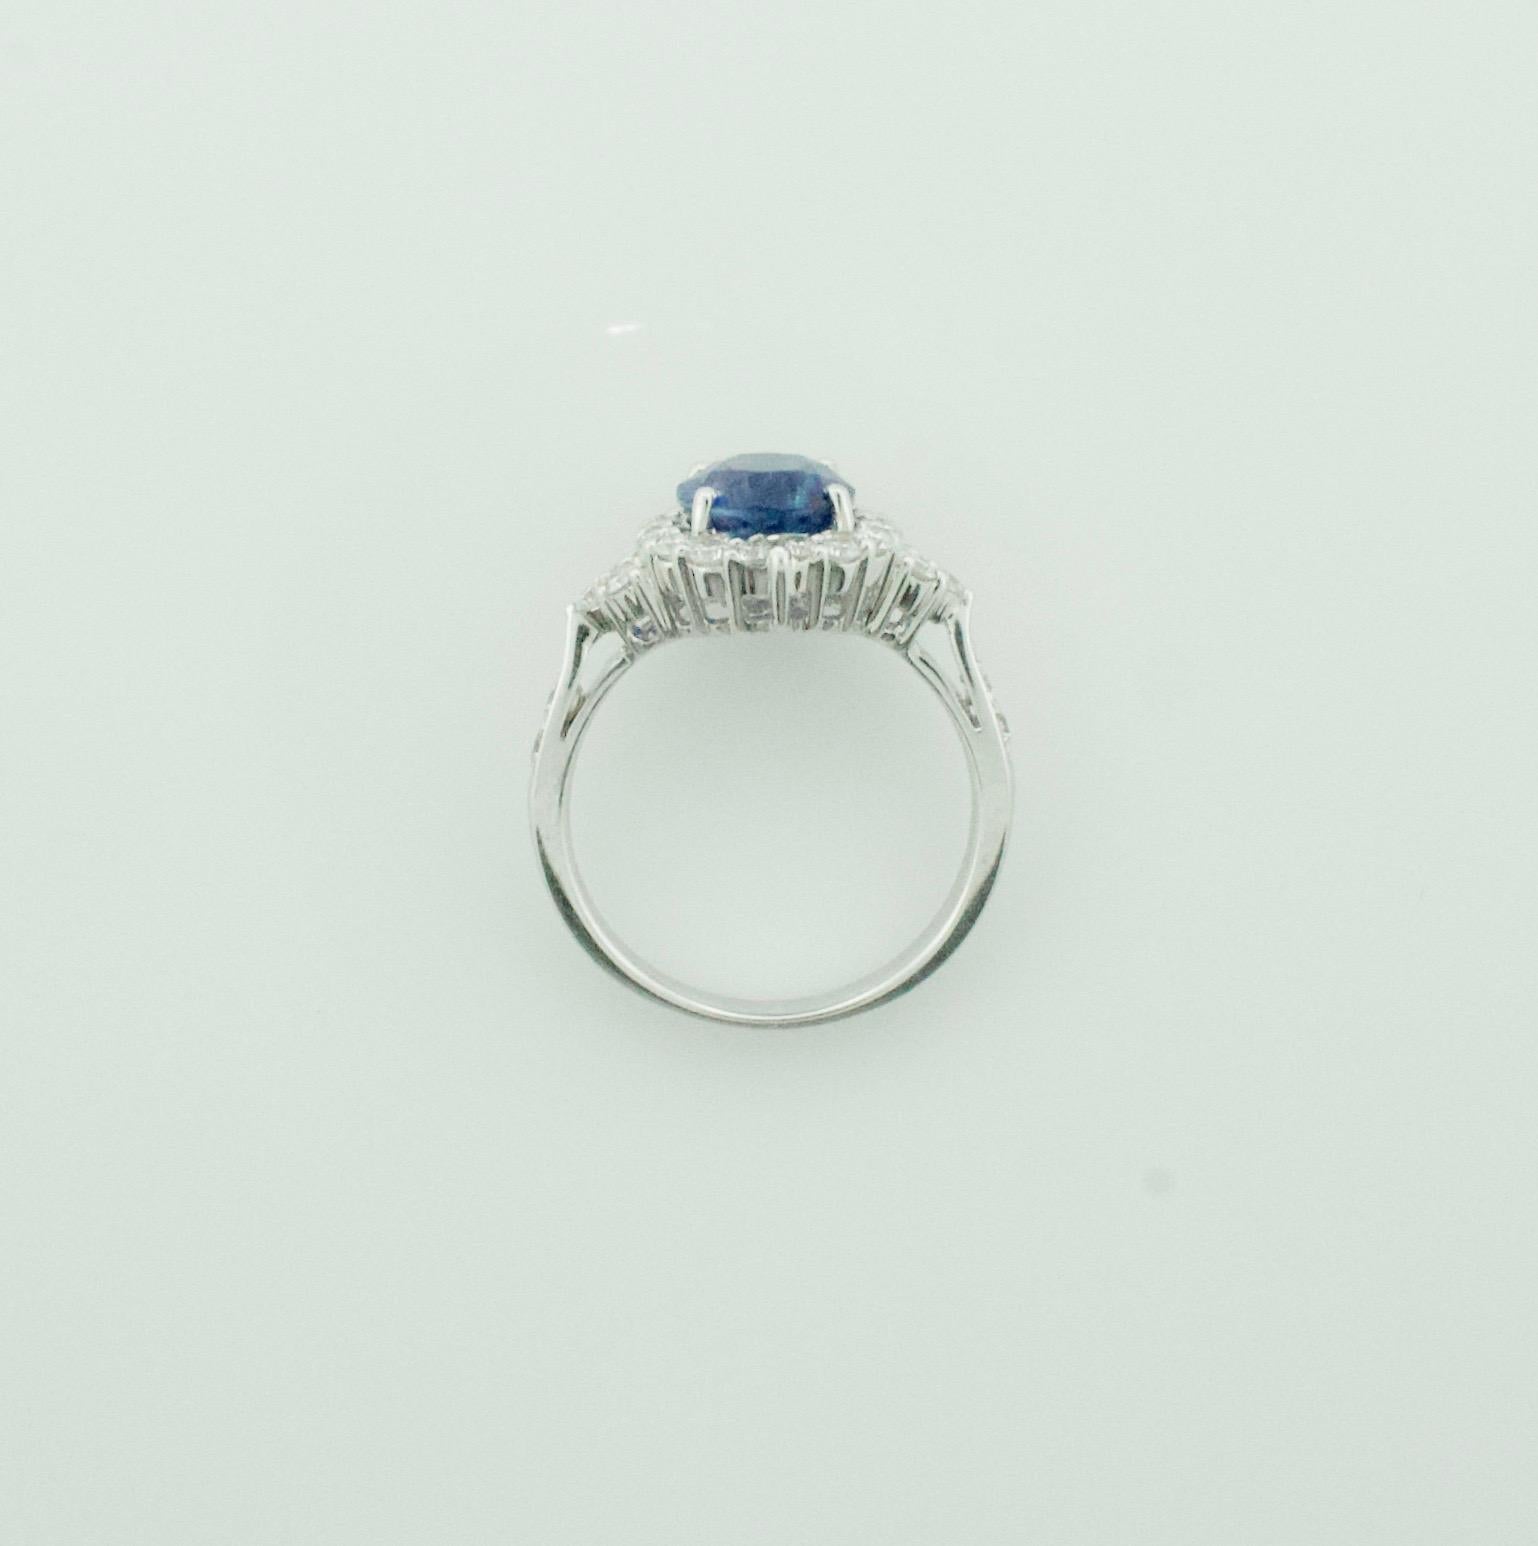 2.92 Carat Sapphire and Diamond Ring in 18k GIA Certified
One Oval Cut Sapphire Weighing 2.92 Carats GIA Certified
26 Round Brilliant Cut Diamonds Weighing .60 Carats [GH VVS-VS] Very Fine
